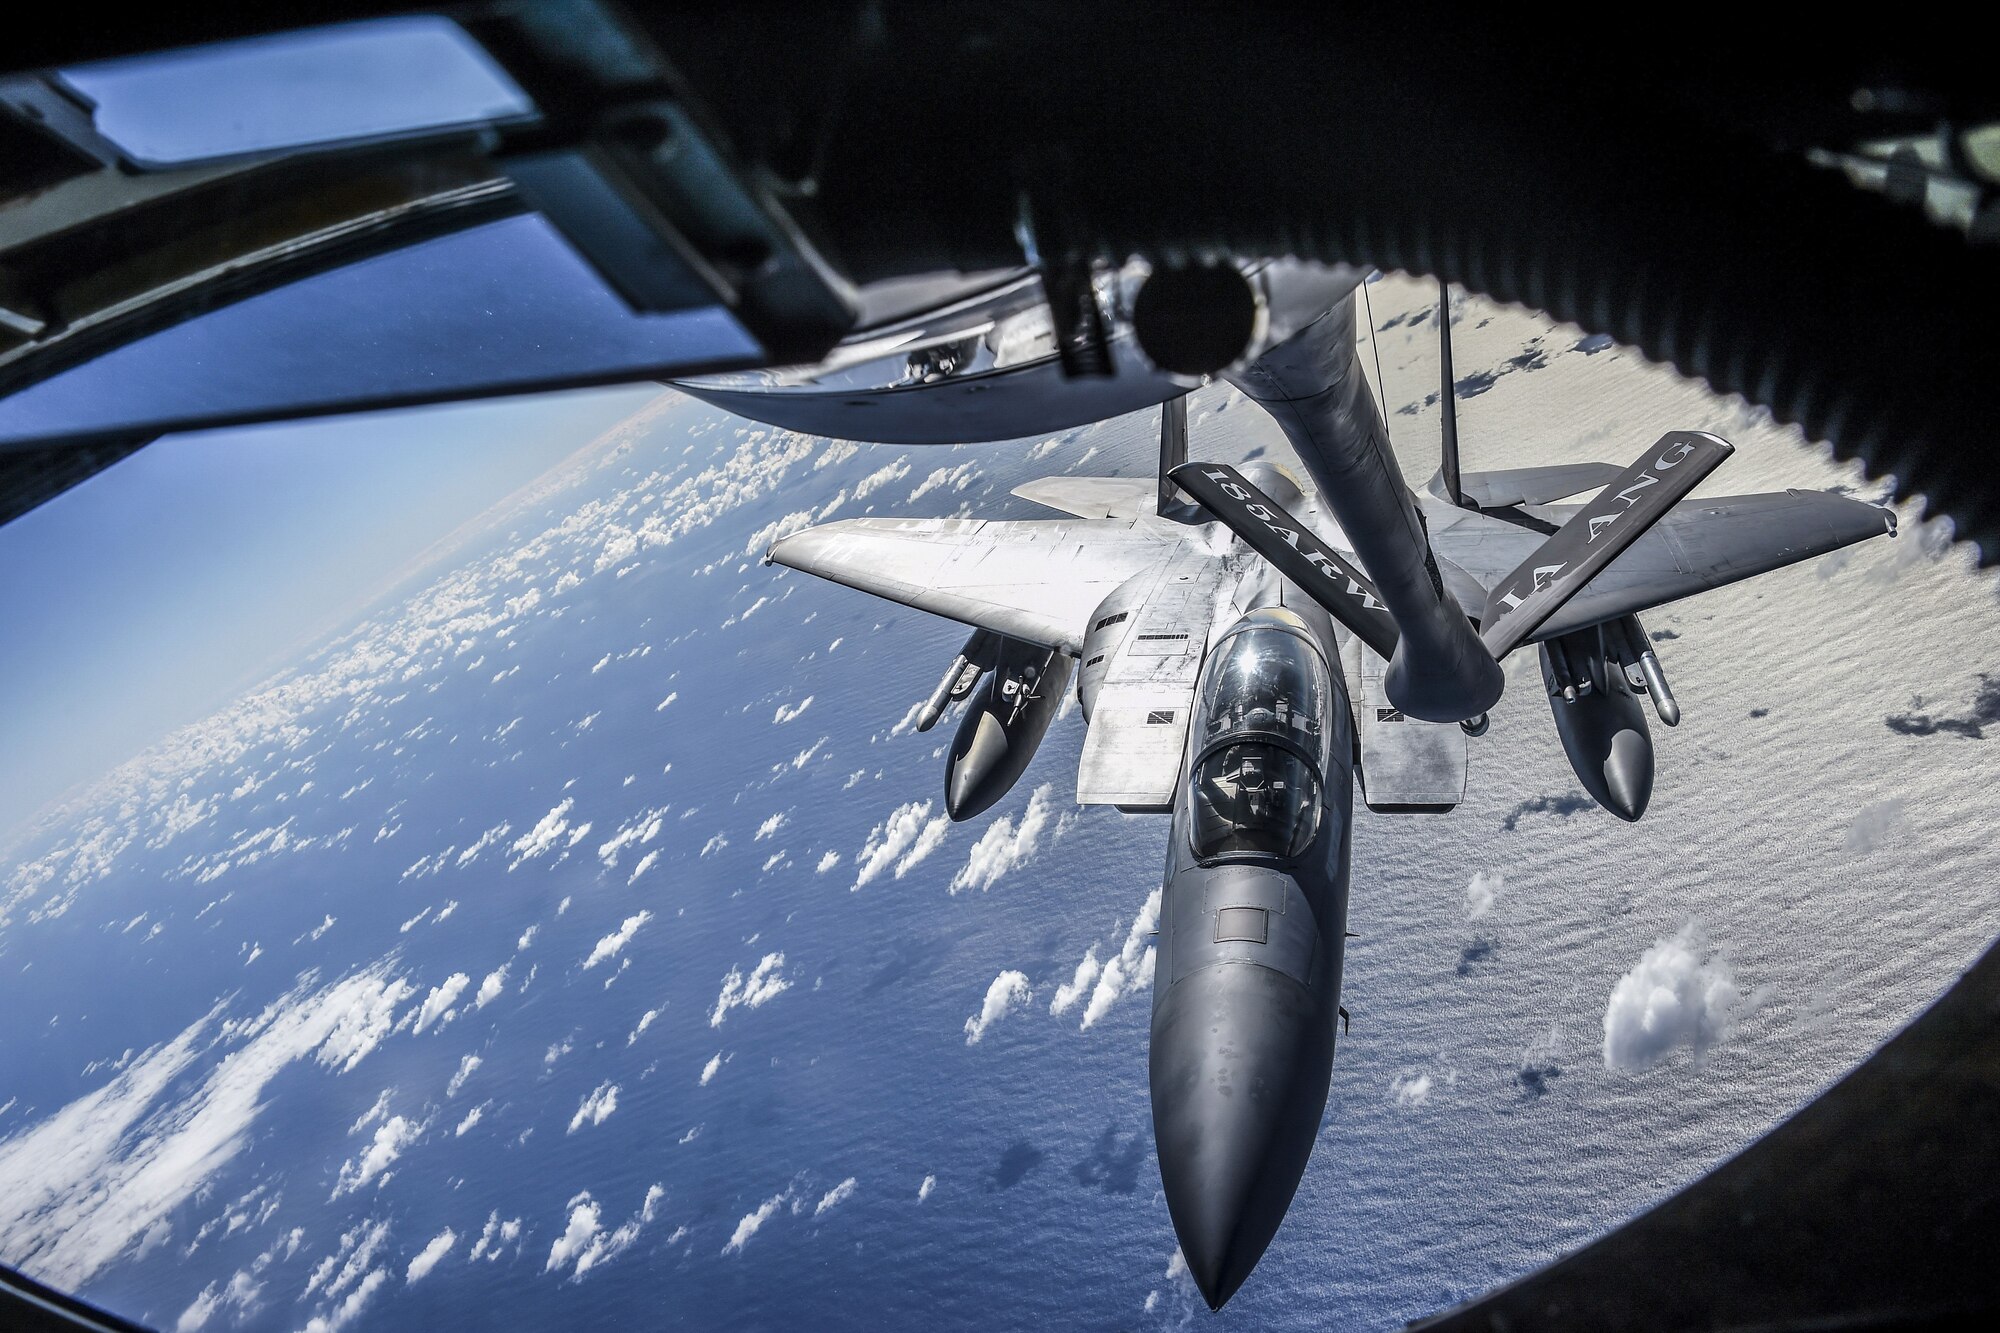 A U.S. Air Force F-15 Eagle from California Air National Guard’s 144th Fighter Wing approaches the boom of a KC-135 Stratotanker from Iowa ANG’s 185th Air Refueling Wing during Sentry Aloha 18-01 above Joint Base Pearl Harbor-Hickam, Hawaii Jan. 17, 2018. Sentry Aloha provides tailored, cost effective and realistic combat training for U.S. Air Force, Air National Guard and other Department of Defense services to provide U.S. warfighters with the skill sets necessary to perform their homeland defense and overseas combat missions. (Air National Guard photo by Senior Master Sgt. Chris Drudge)